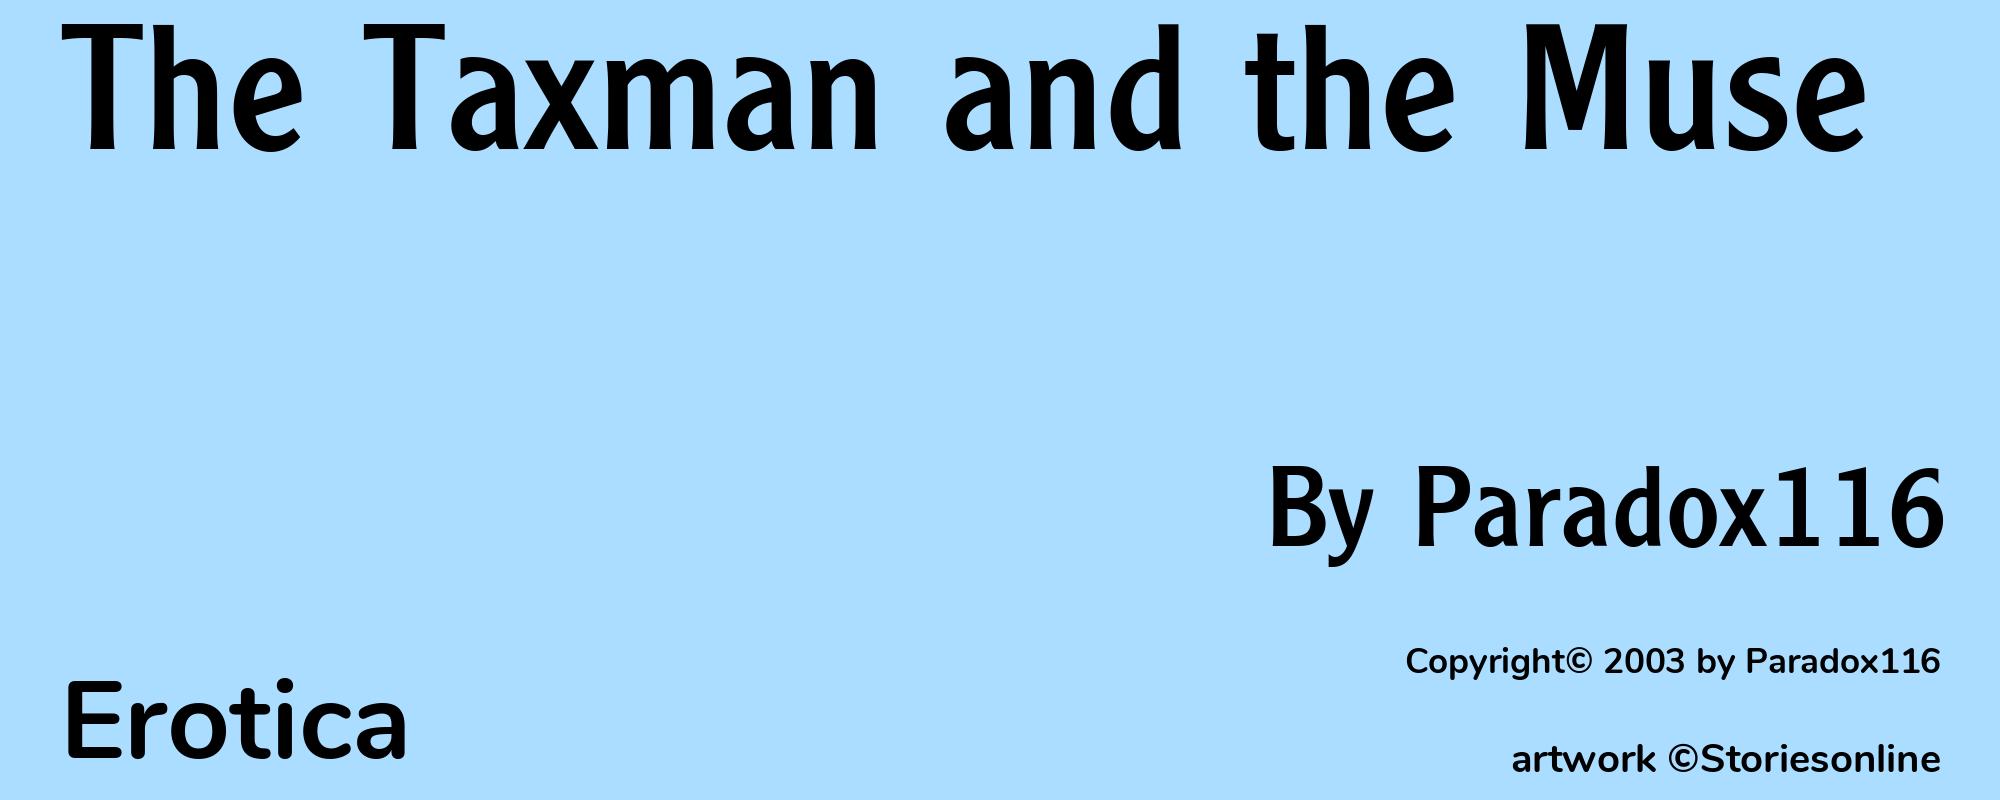 The Taxman and the Muse - Cover